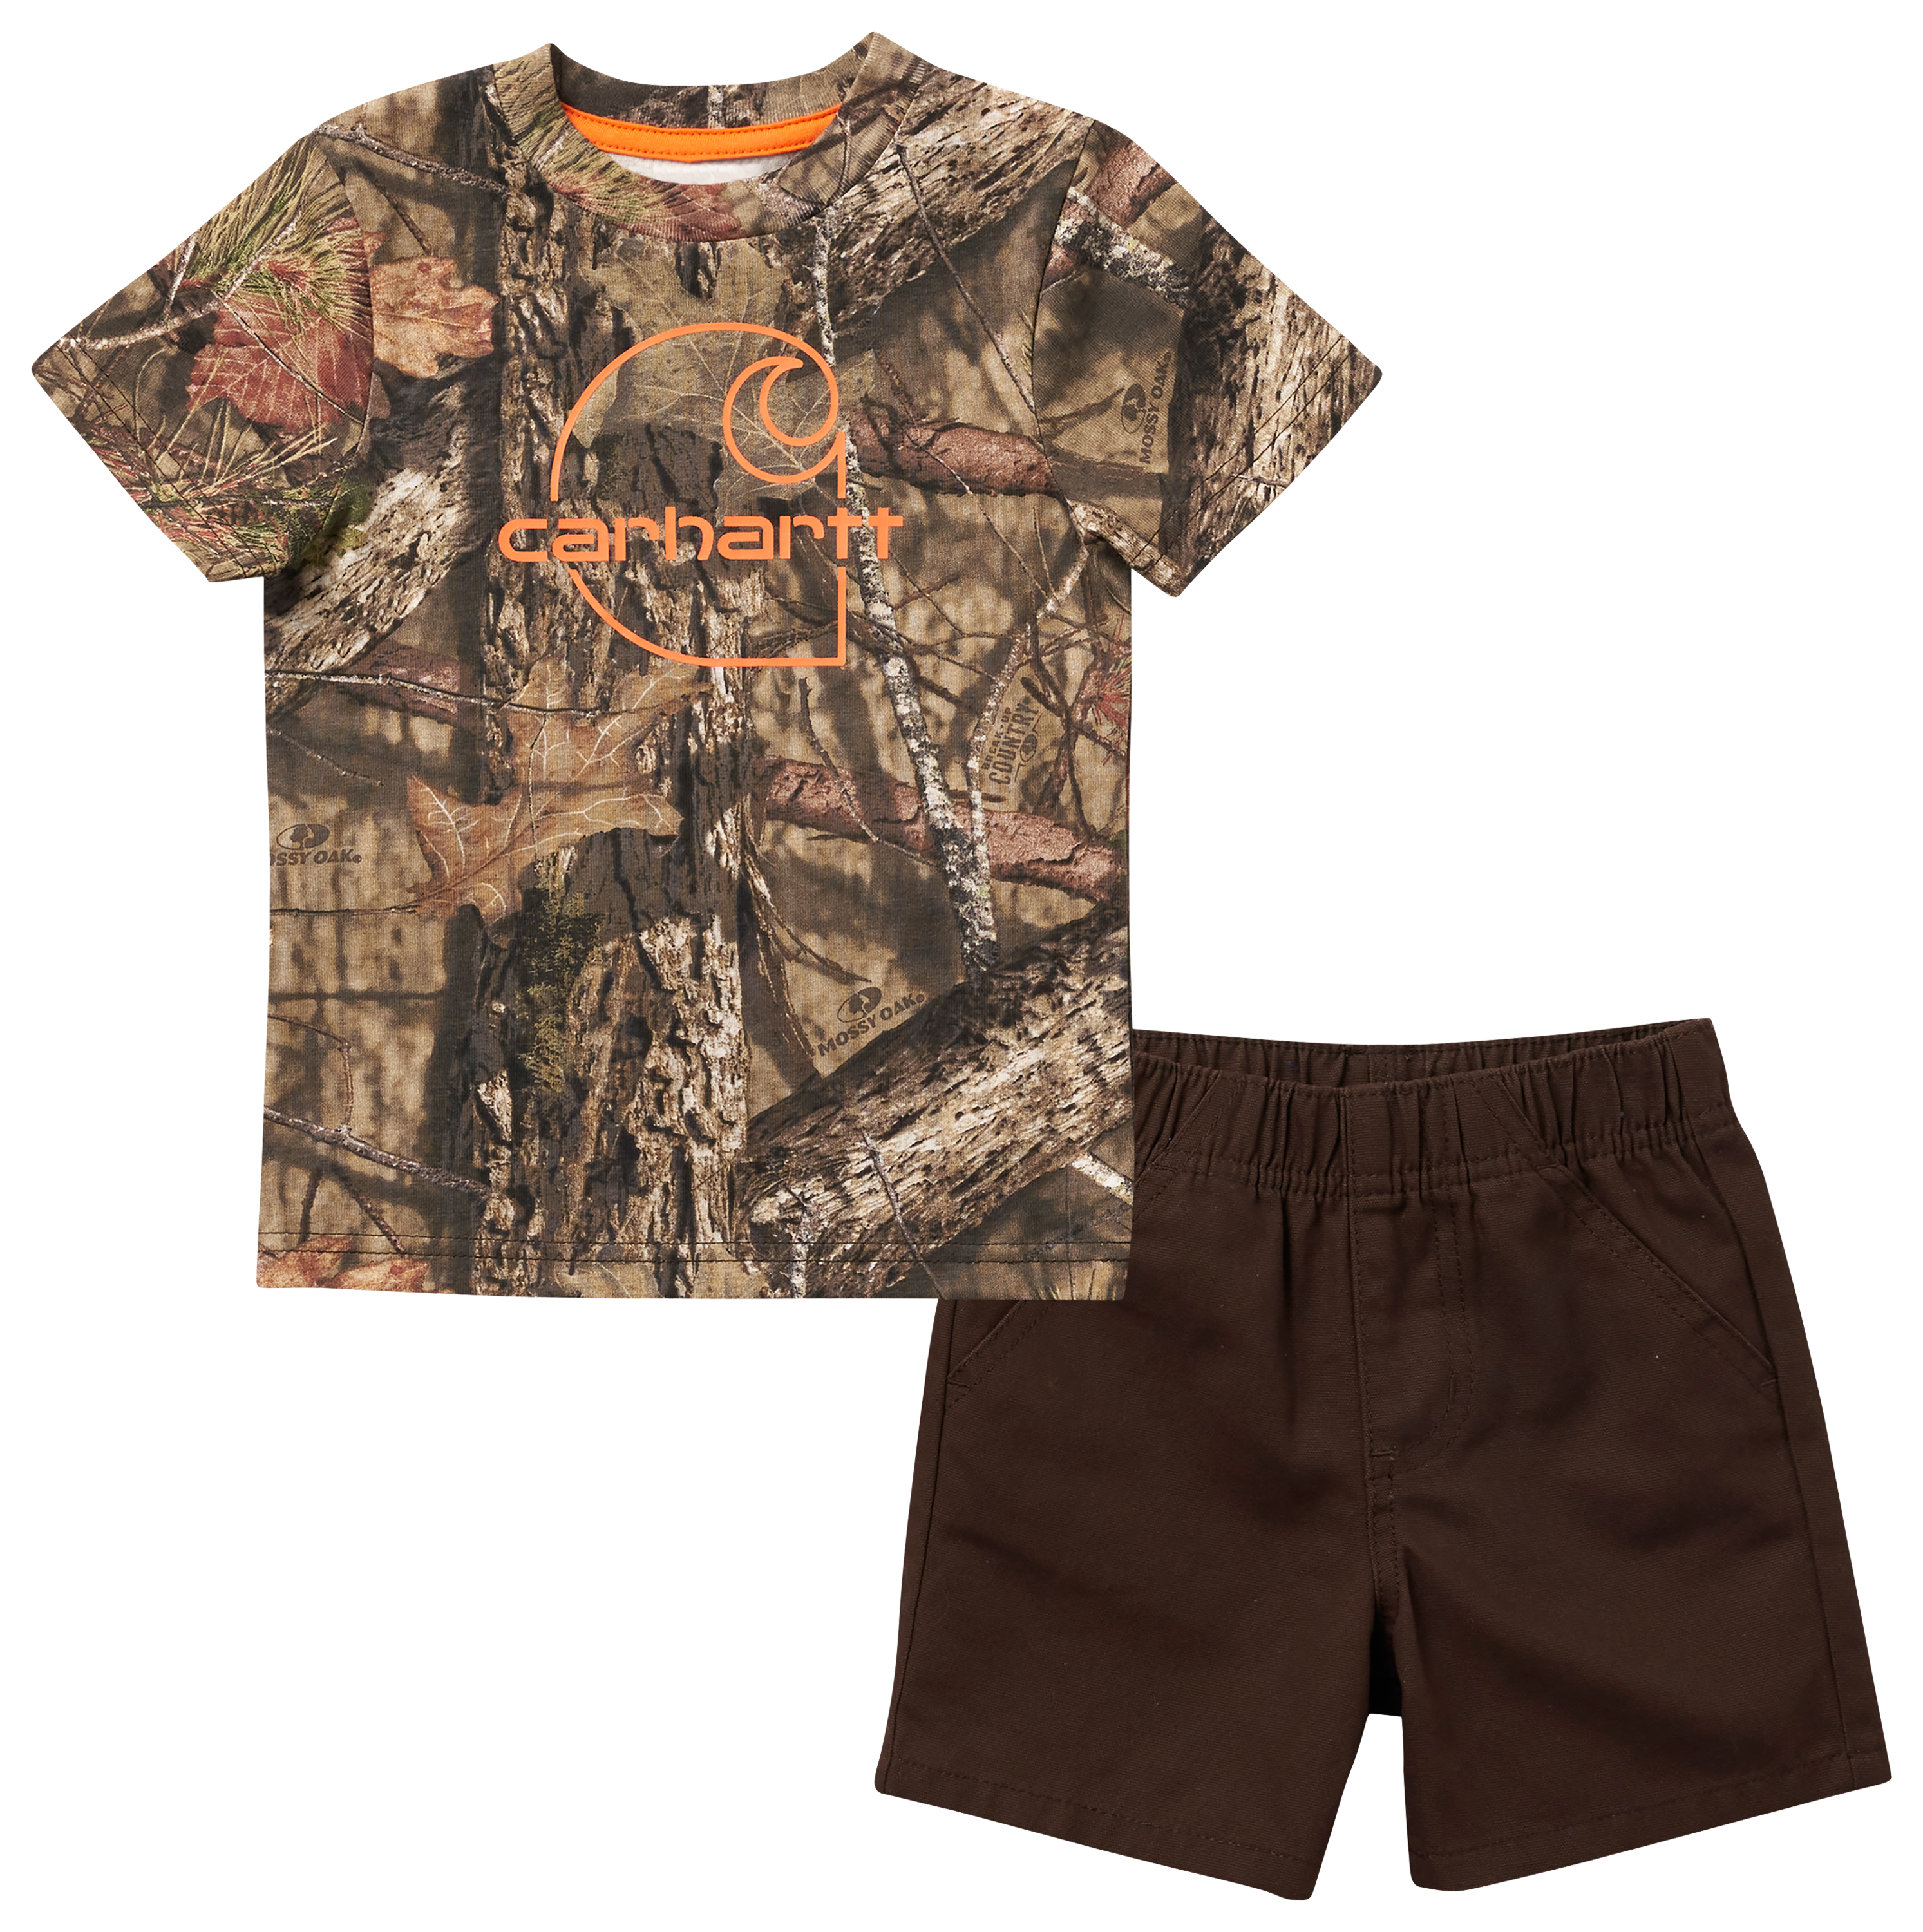 Carhartt Camo Short Sleeve T Shirt and Canvas Shorts Set for Baby Boys Mustang Brown/Mossy Oak Break Up Country 9 Months